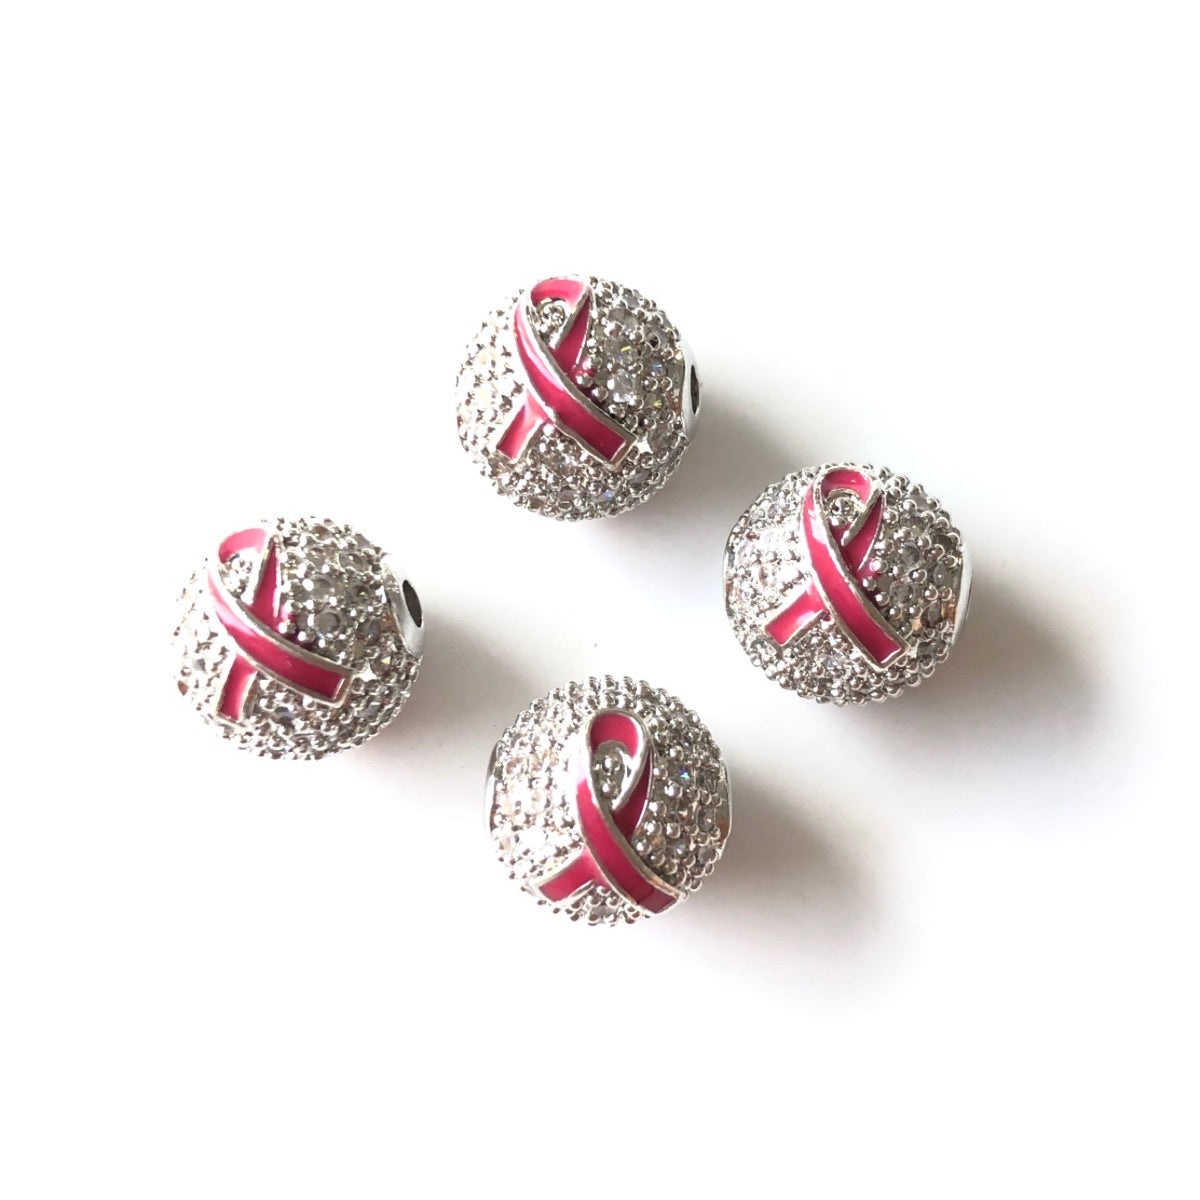 10-20-50pcs/lot 10mm CZ Paved Breast Cancer Awareness Pink Ribbon Ball Spacers Beads Silver CZ Paved Spacers 10mm Beads Ball Beads Breast Cancer Awareness New Spacers Arrivals Charms Beads Beyond